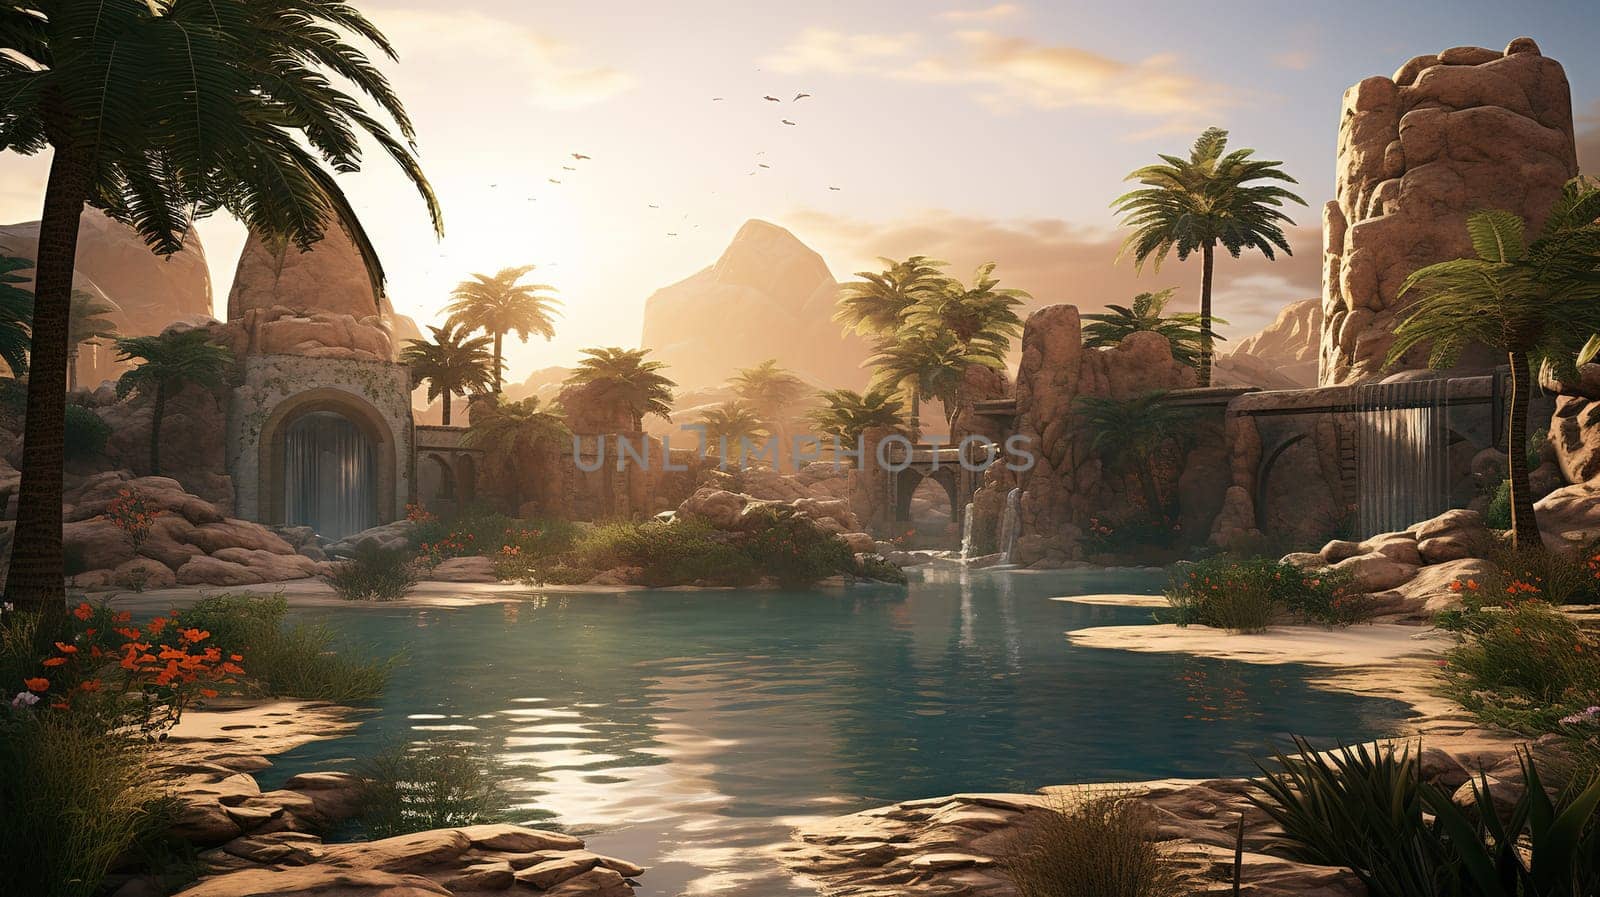 Oasis a fertile spot in a desert, where water is found with palm trees, nature concept by Kadula